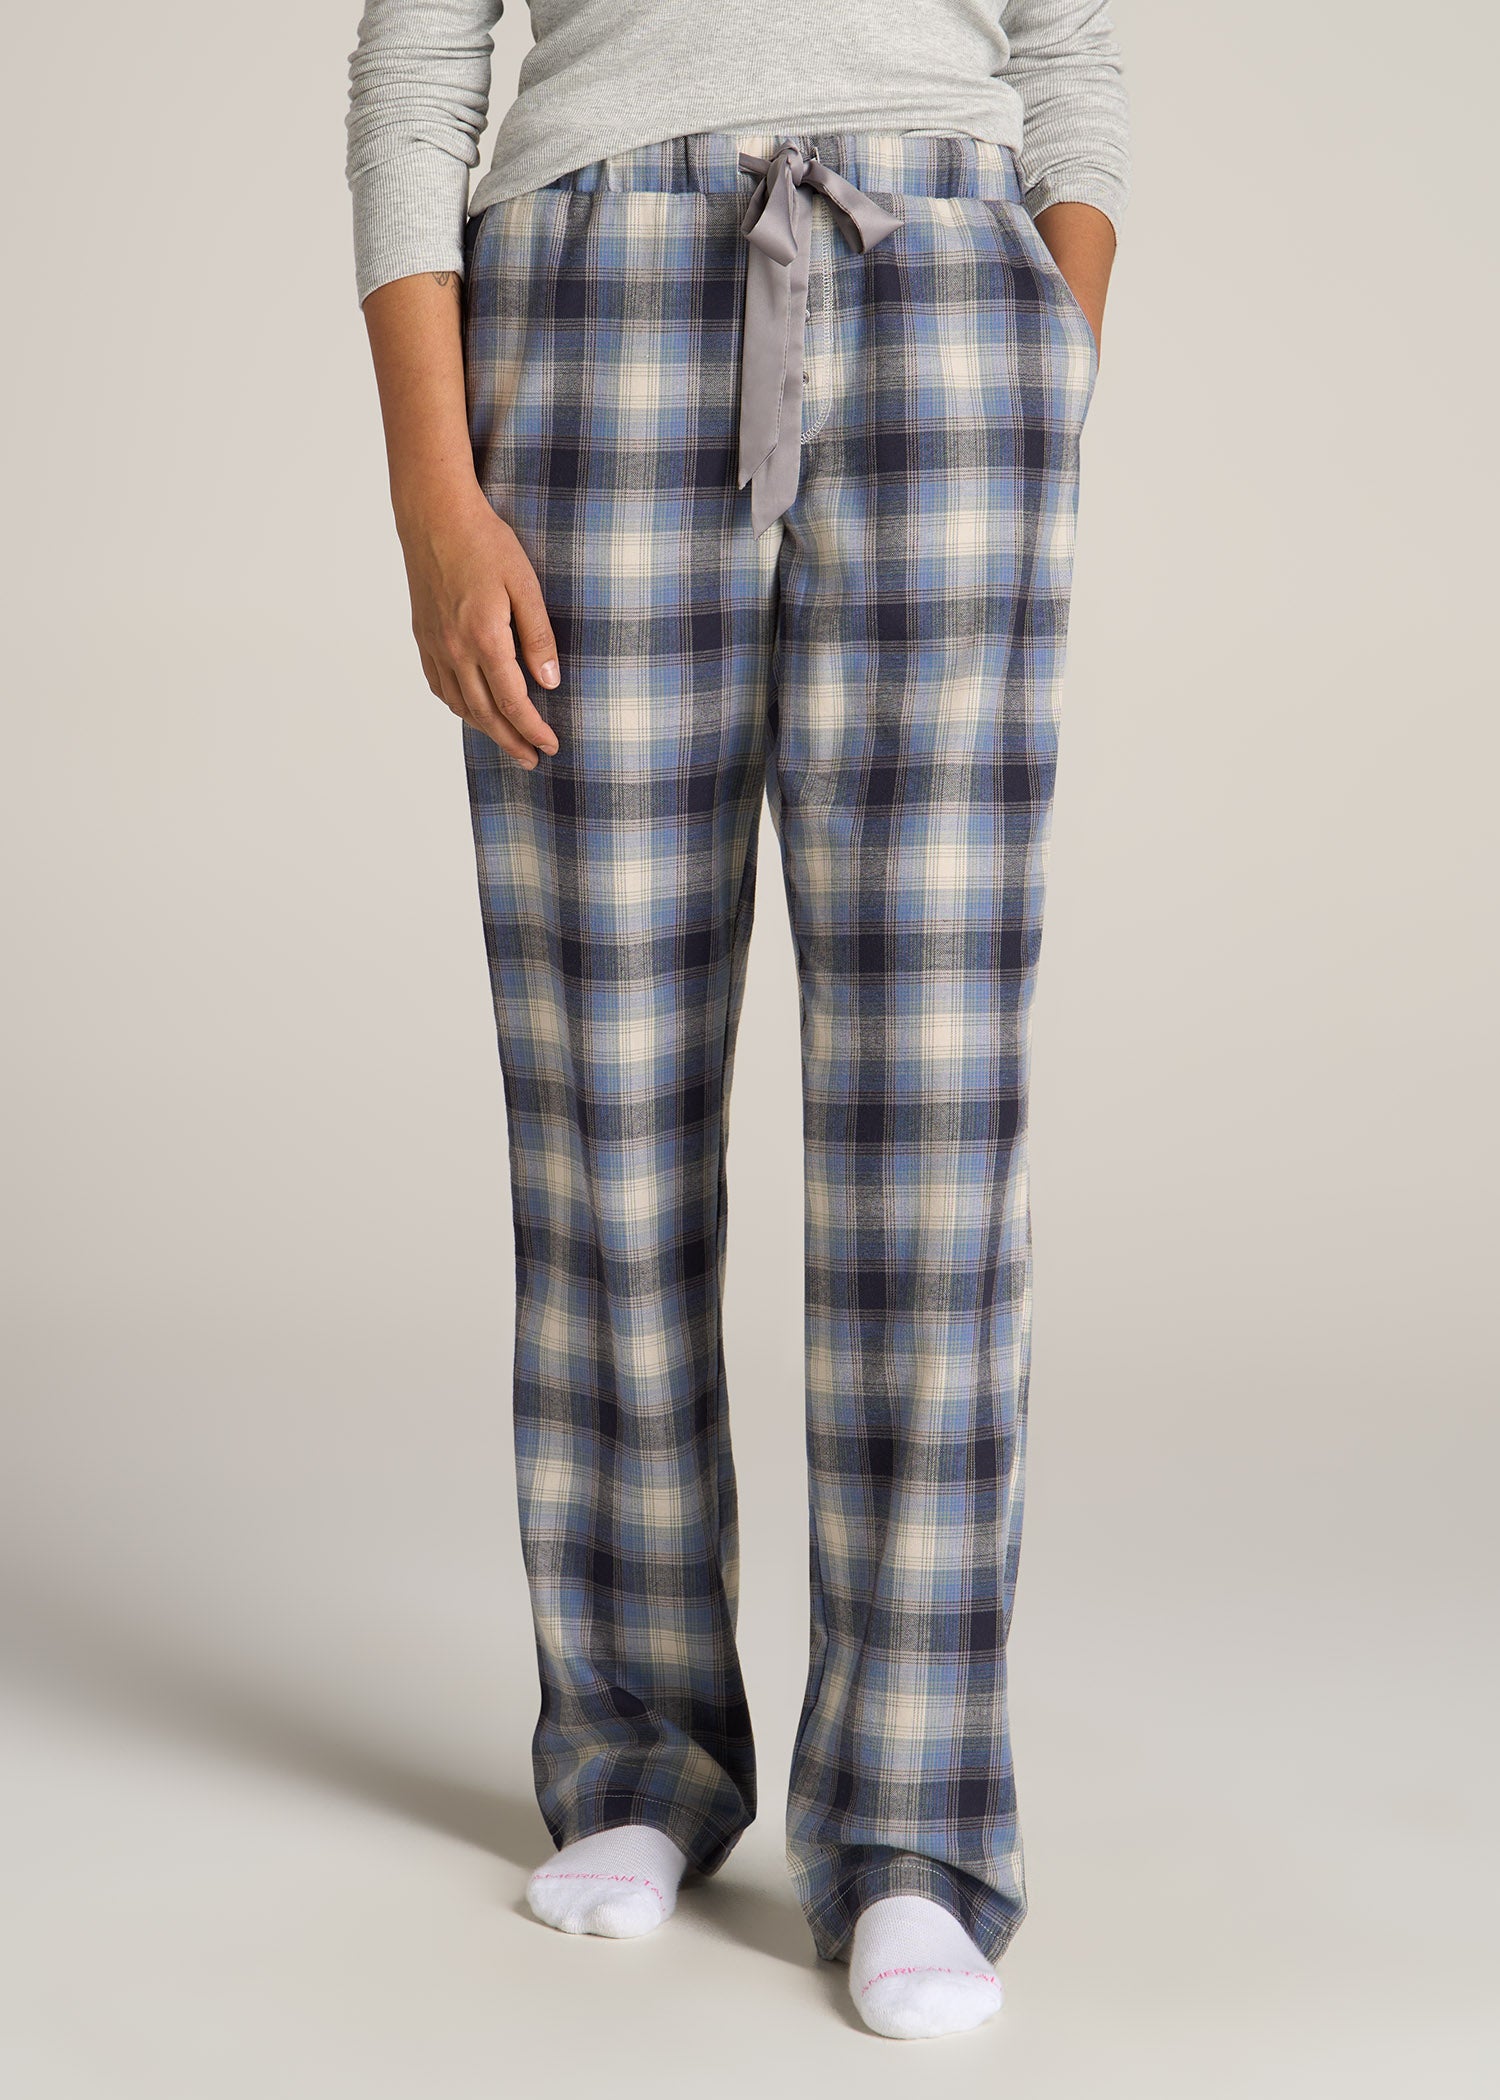 Open-Bottom Flannel Women's Tall Pajama Pants in Blue and Grey Weave